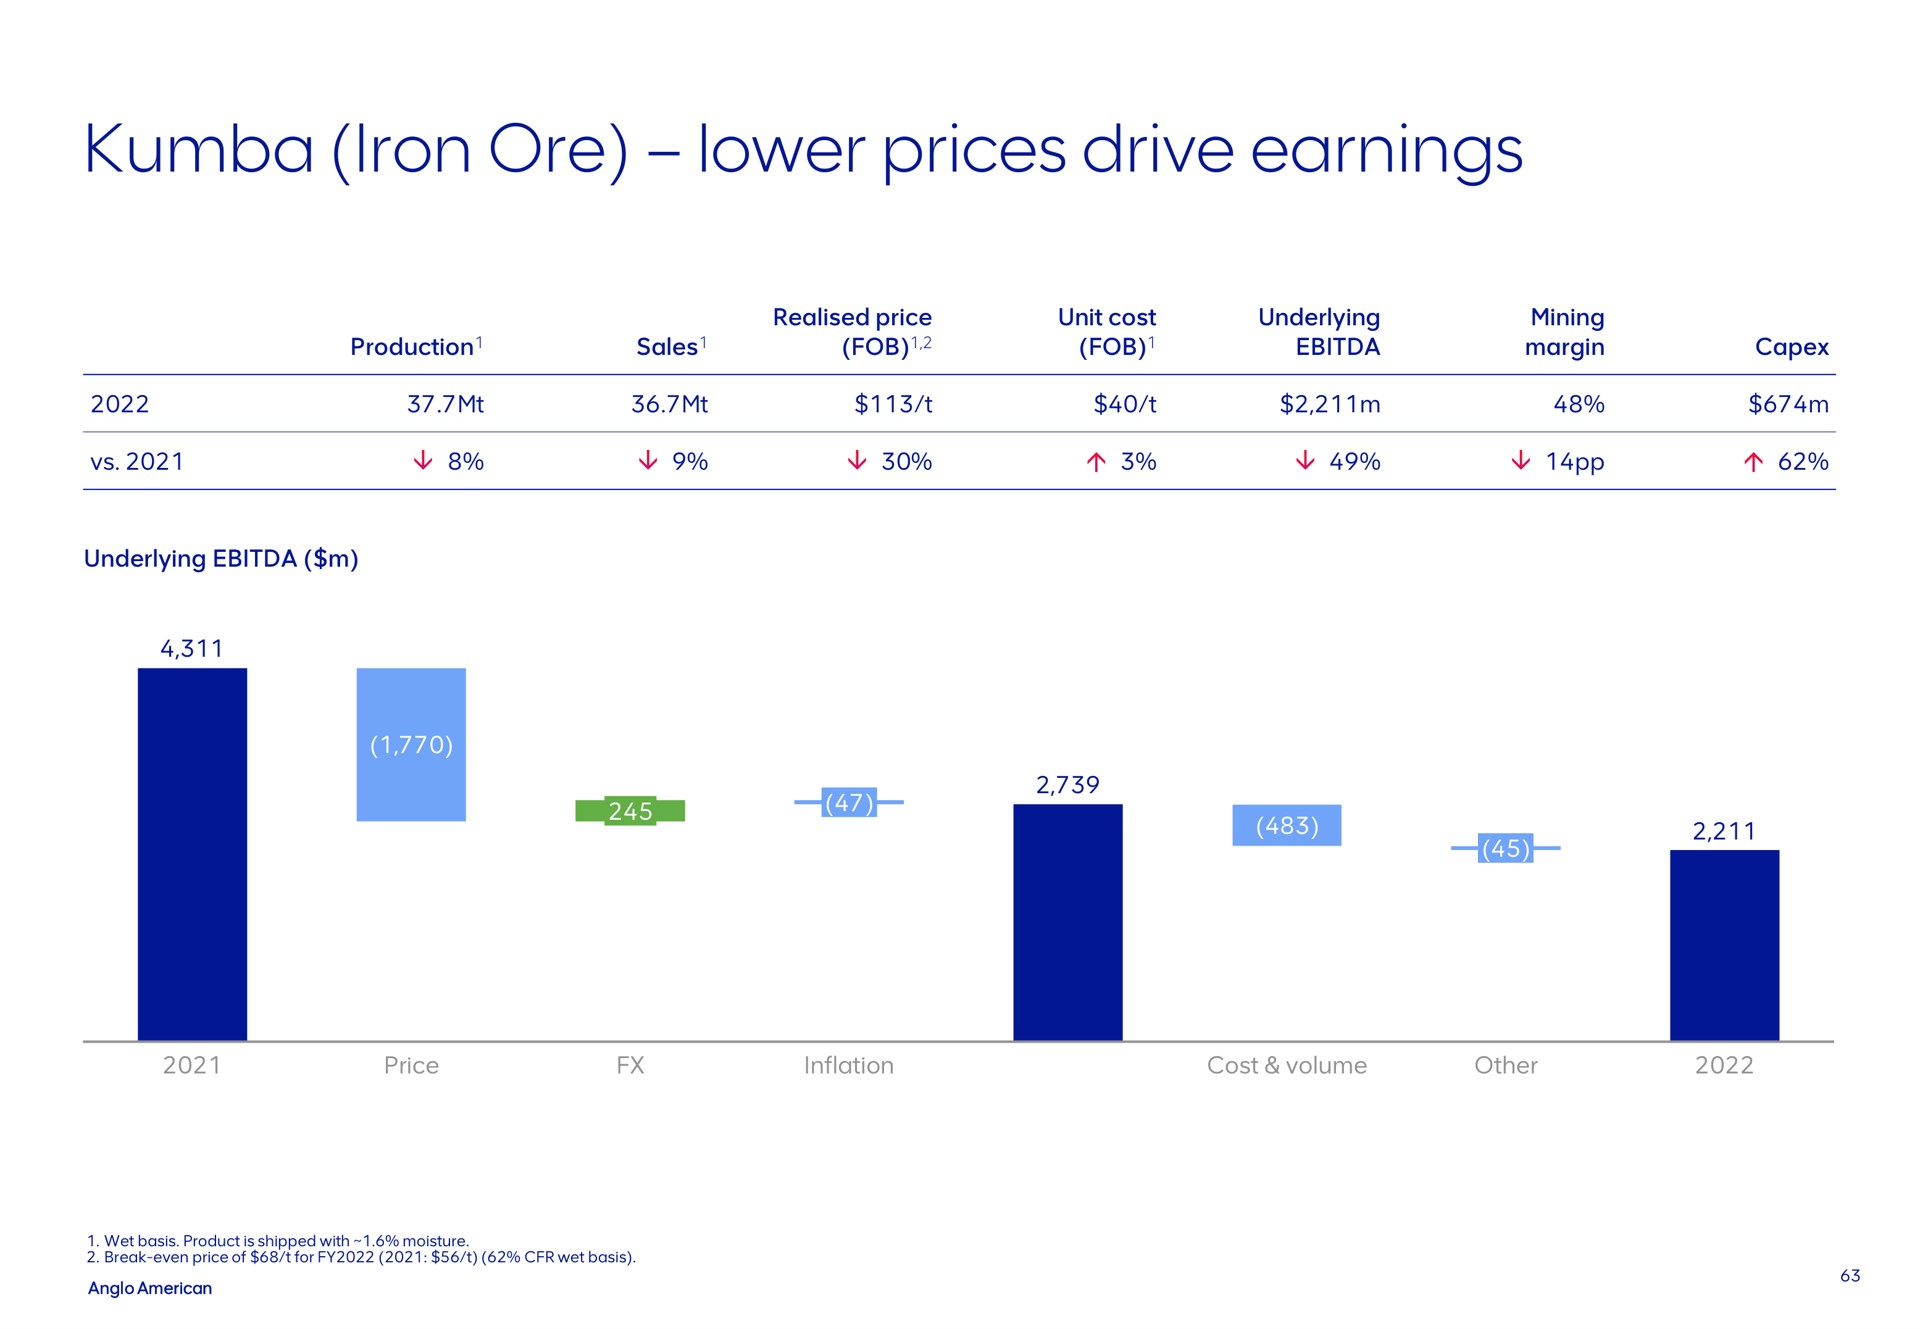 iron ore lower prices drive earnings | AngloAmerican